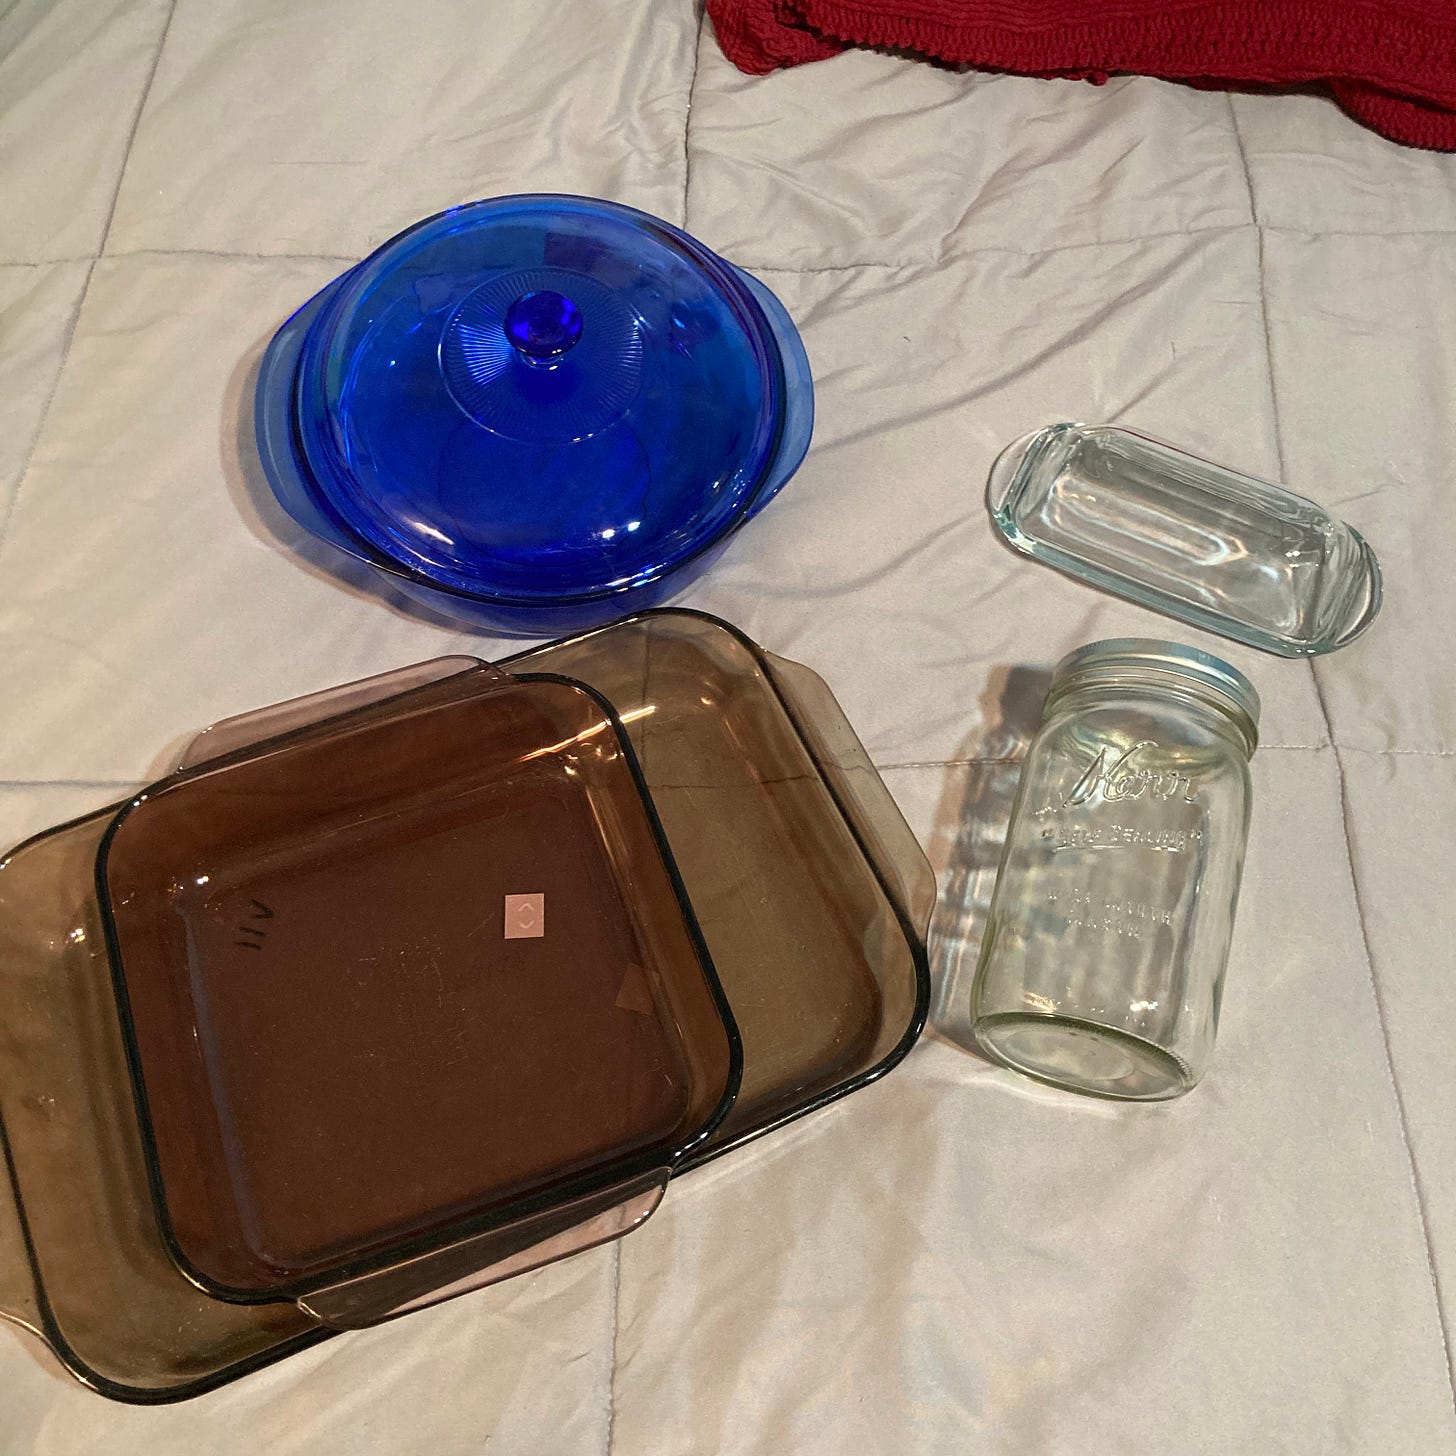 Image Description: A round cobalt blue baking dish with a lid, a clear glass butter dish, a clear glass wide mouth Kerr mason jar, a rectangular amber glass baking dish nested with a square purple glass baking dish all lay on a gray quilted bedspread. 